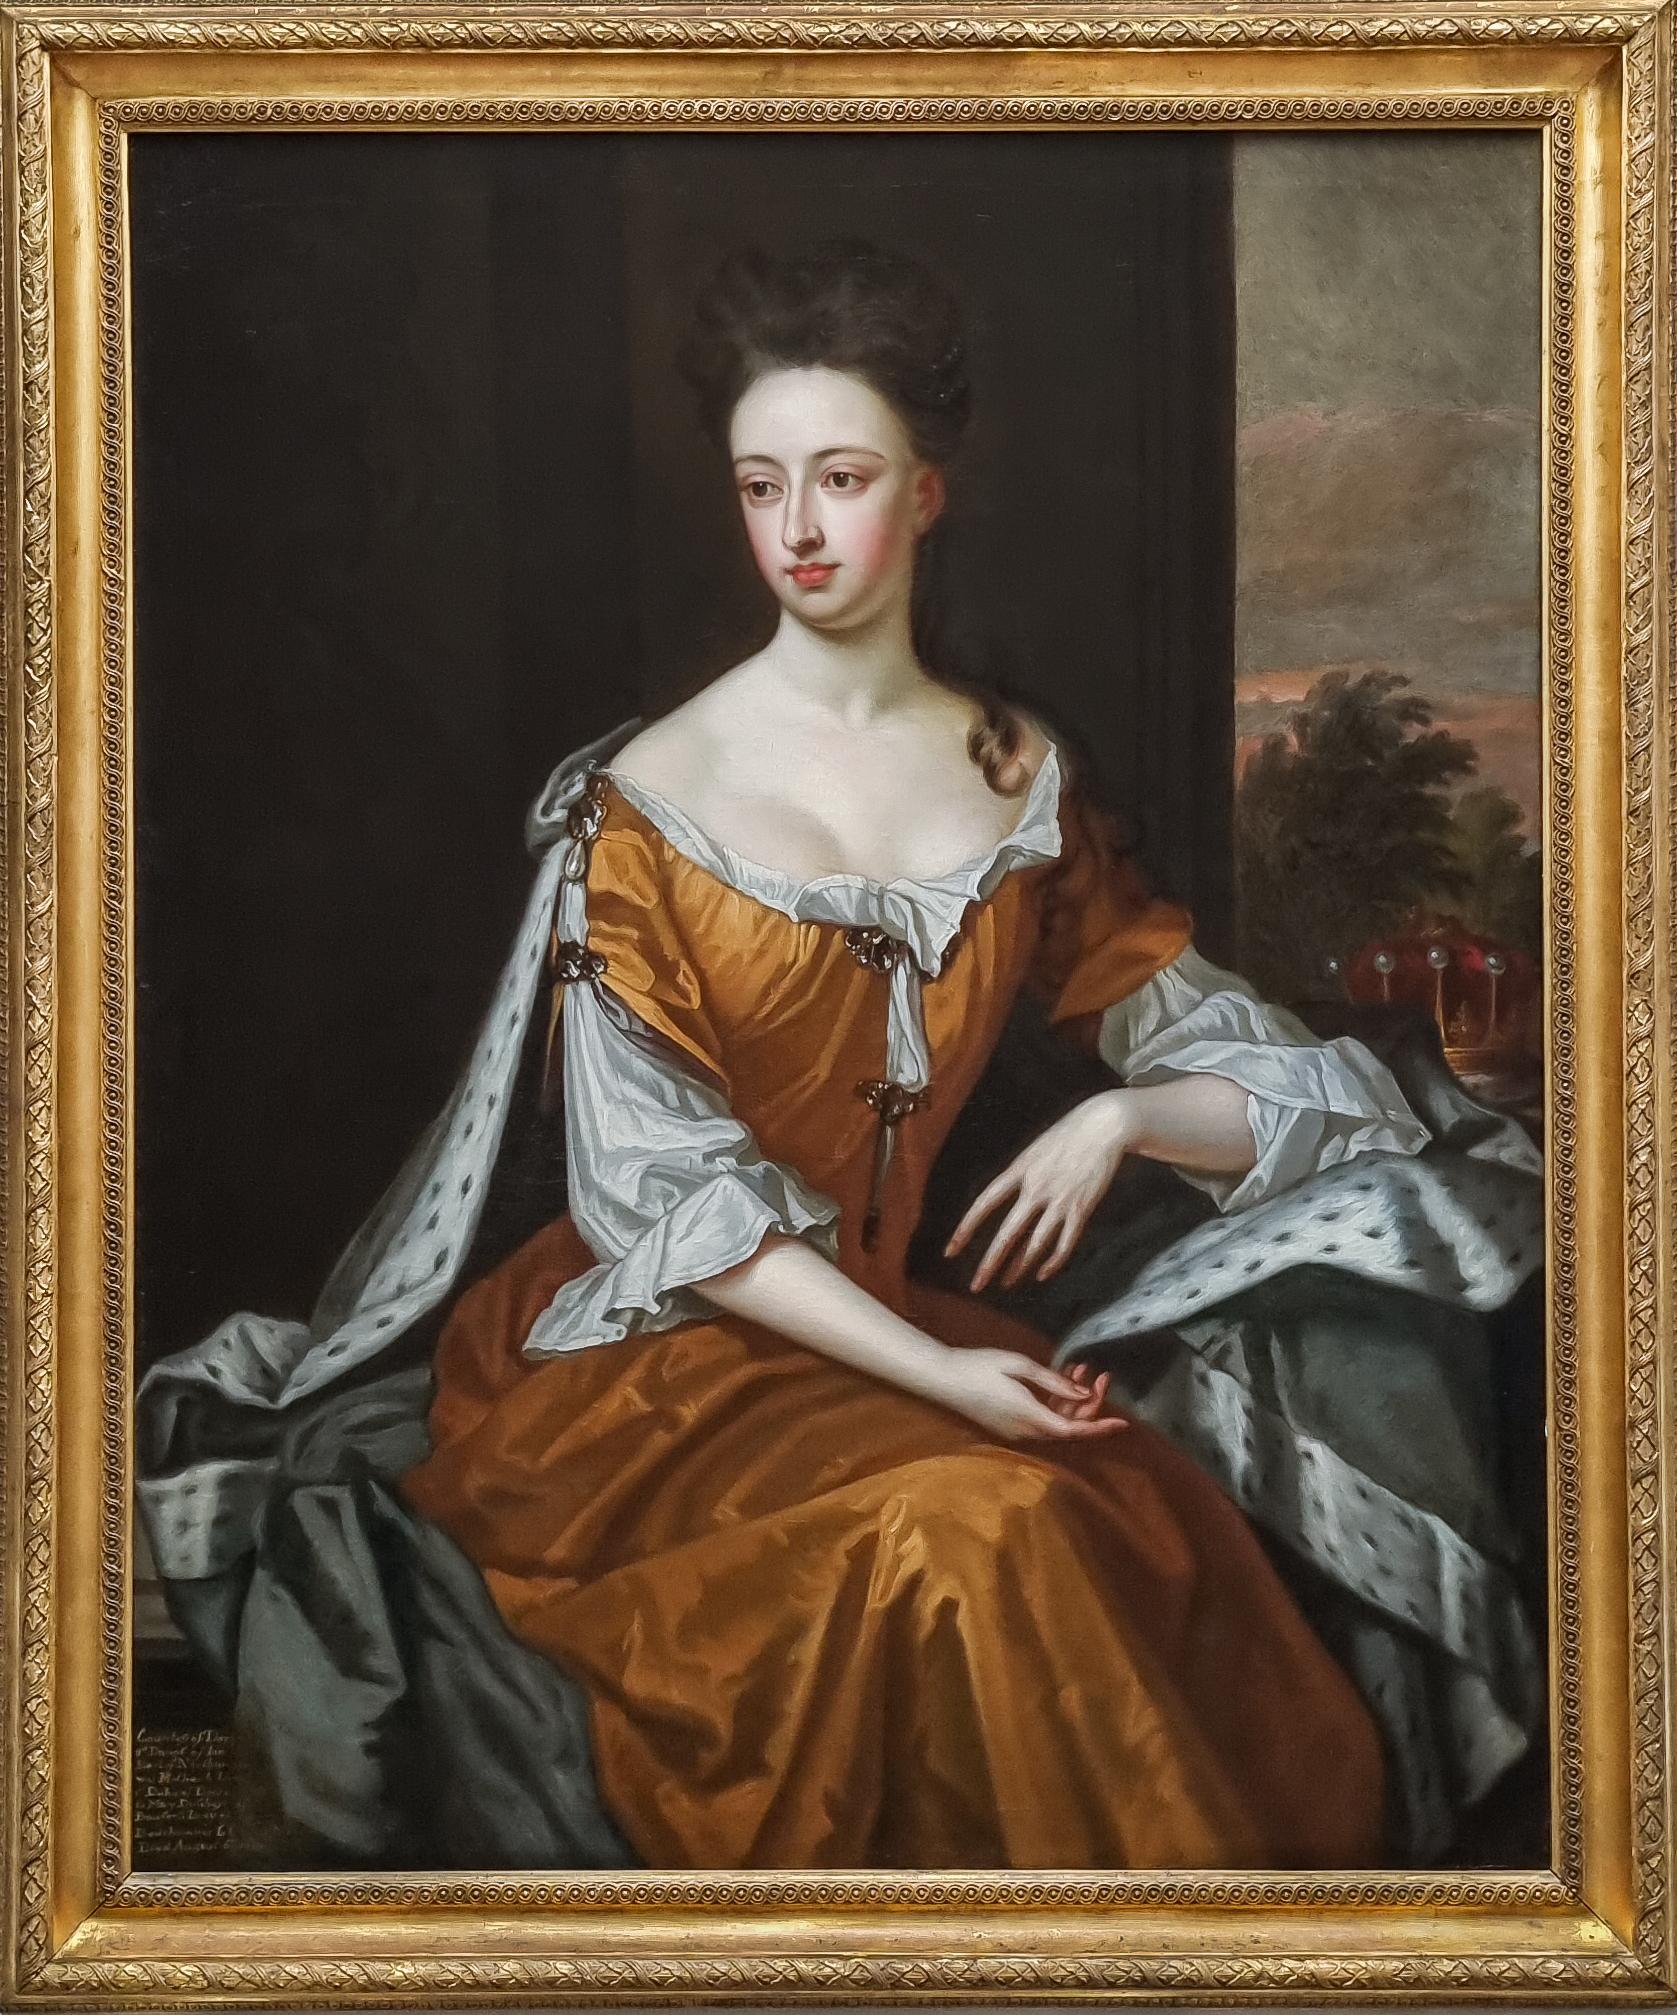 studio of Sir Godfrey Kneller Portrait Painting - Portrait of Lady, Mary Sackville, Countess of Dorset, Studio of Godfrey Kneller